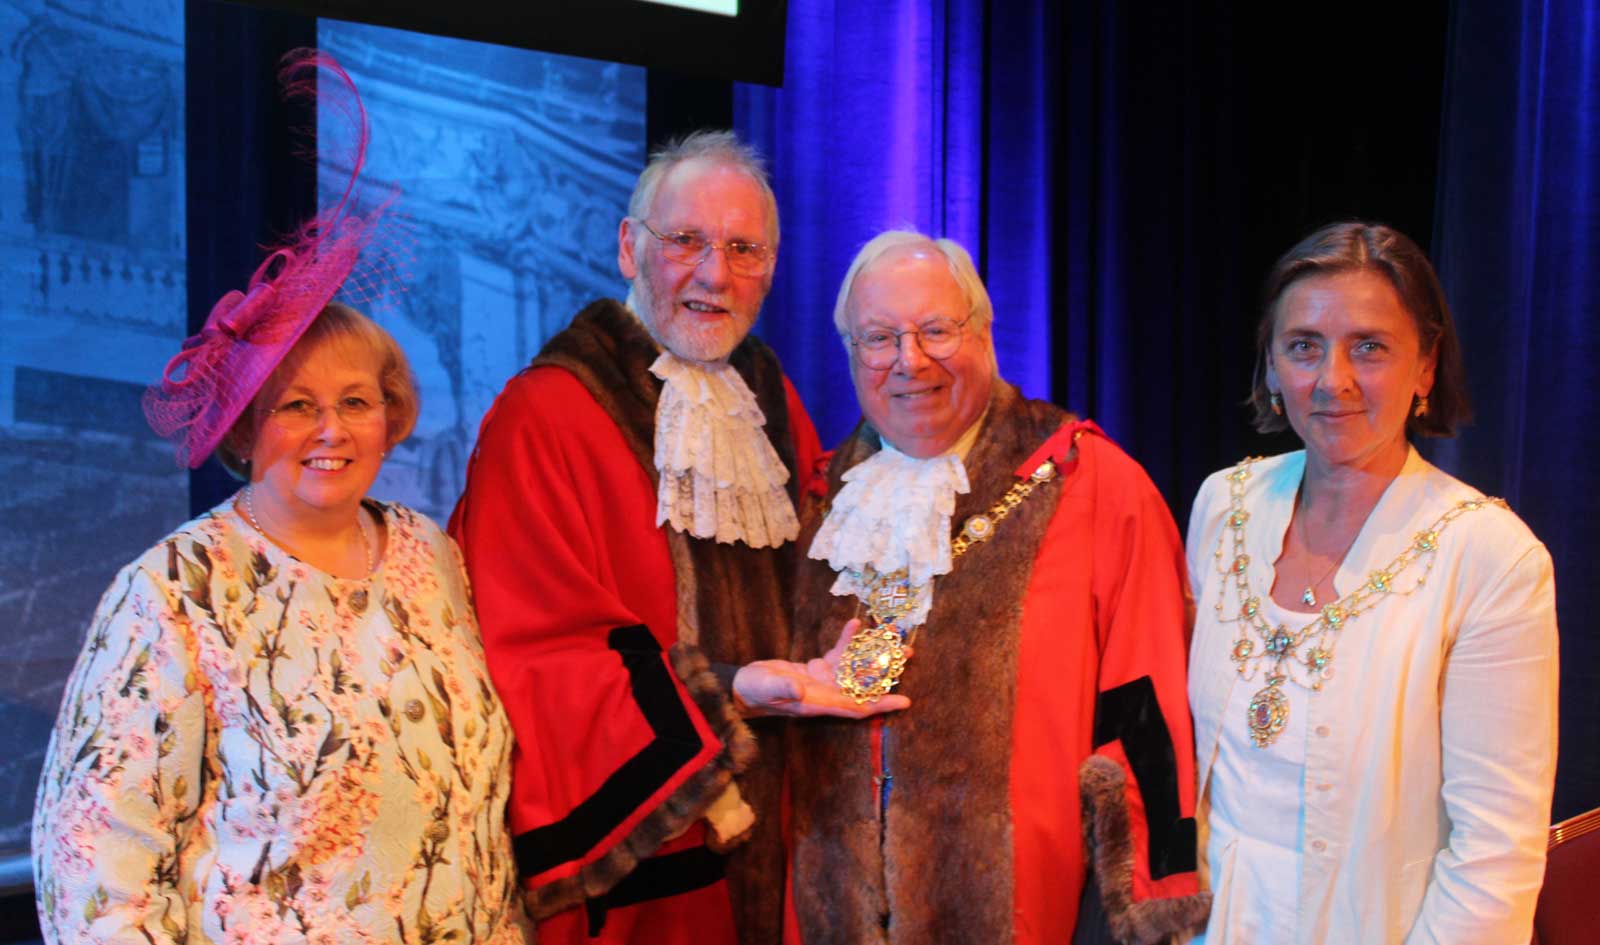 Left to right: Former Mayoress Lynne Simms, former Mayor Councillor Nigel Simms, new Mayor Councillor Nick Brown and Mayoress Linda Brown